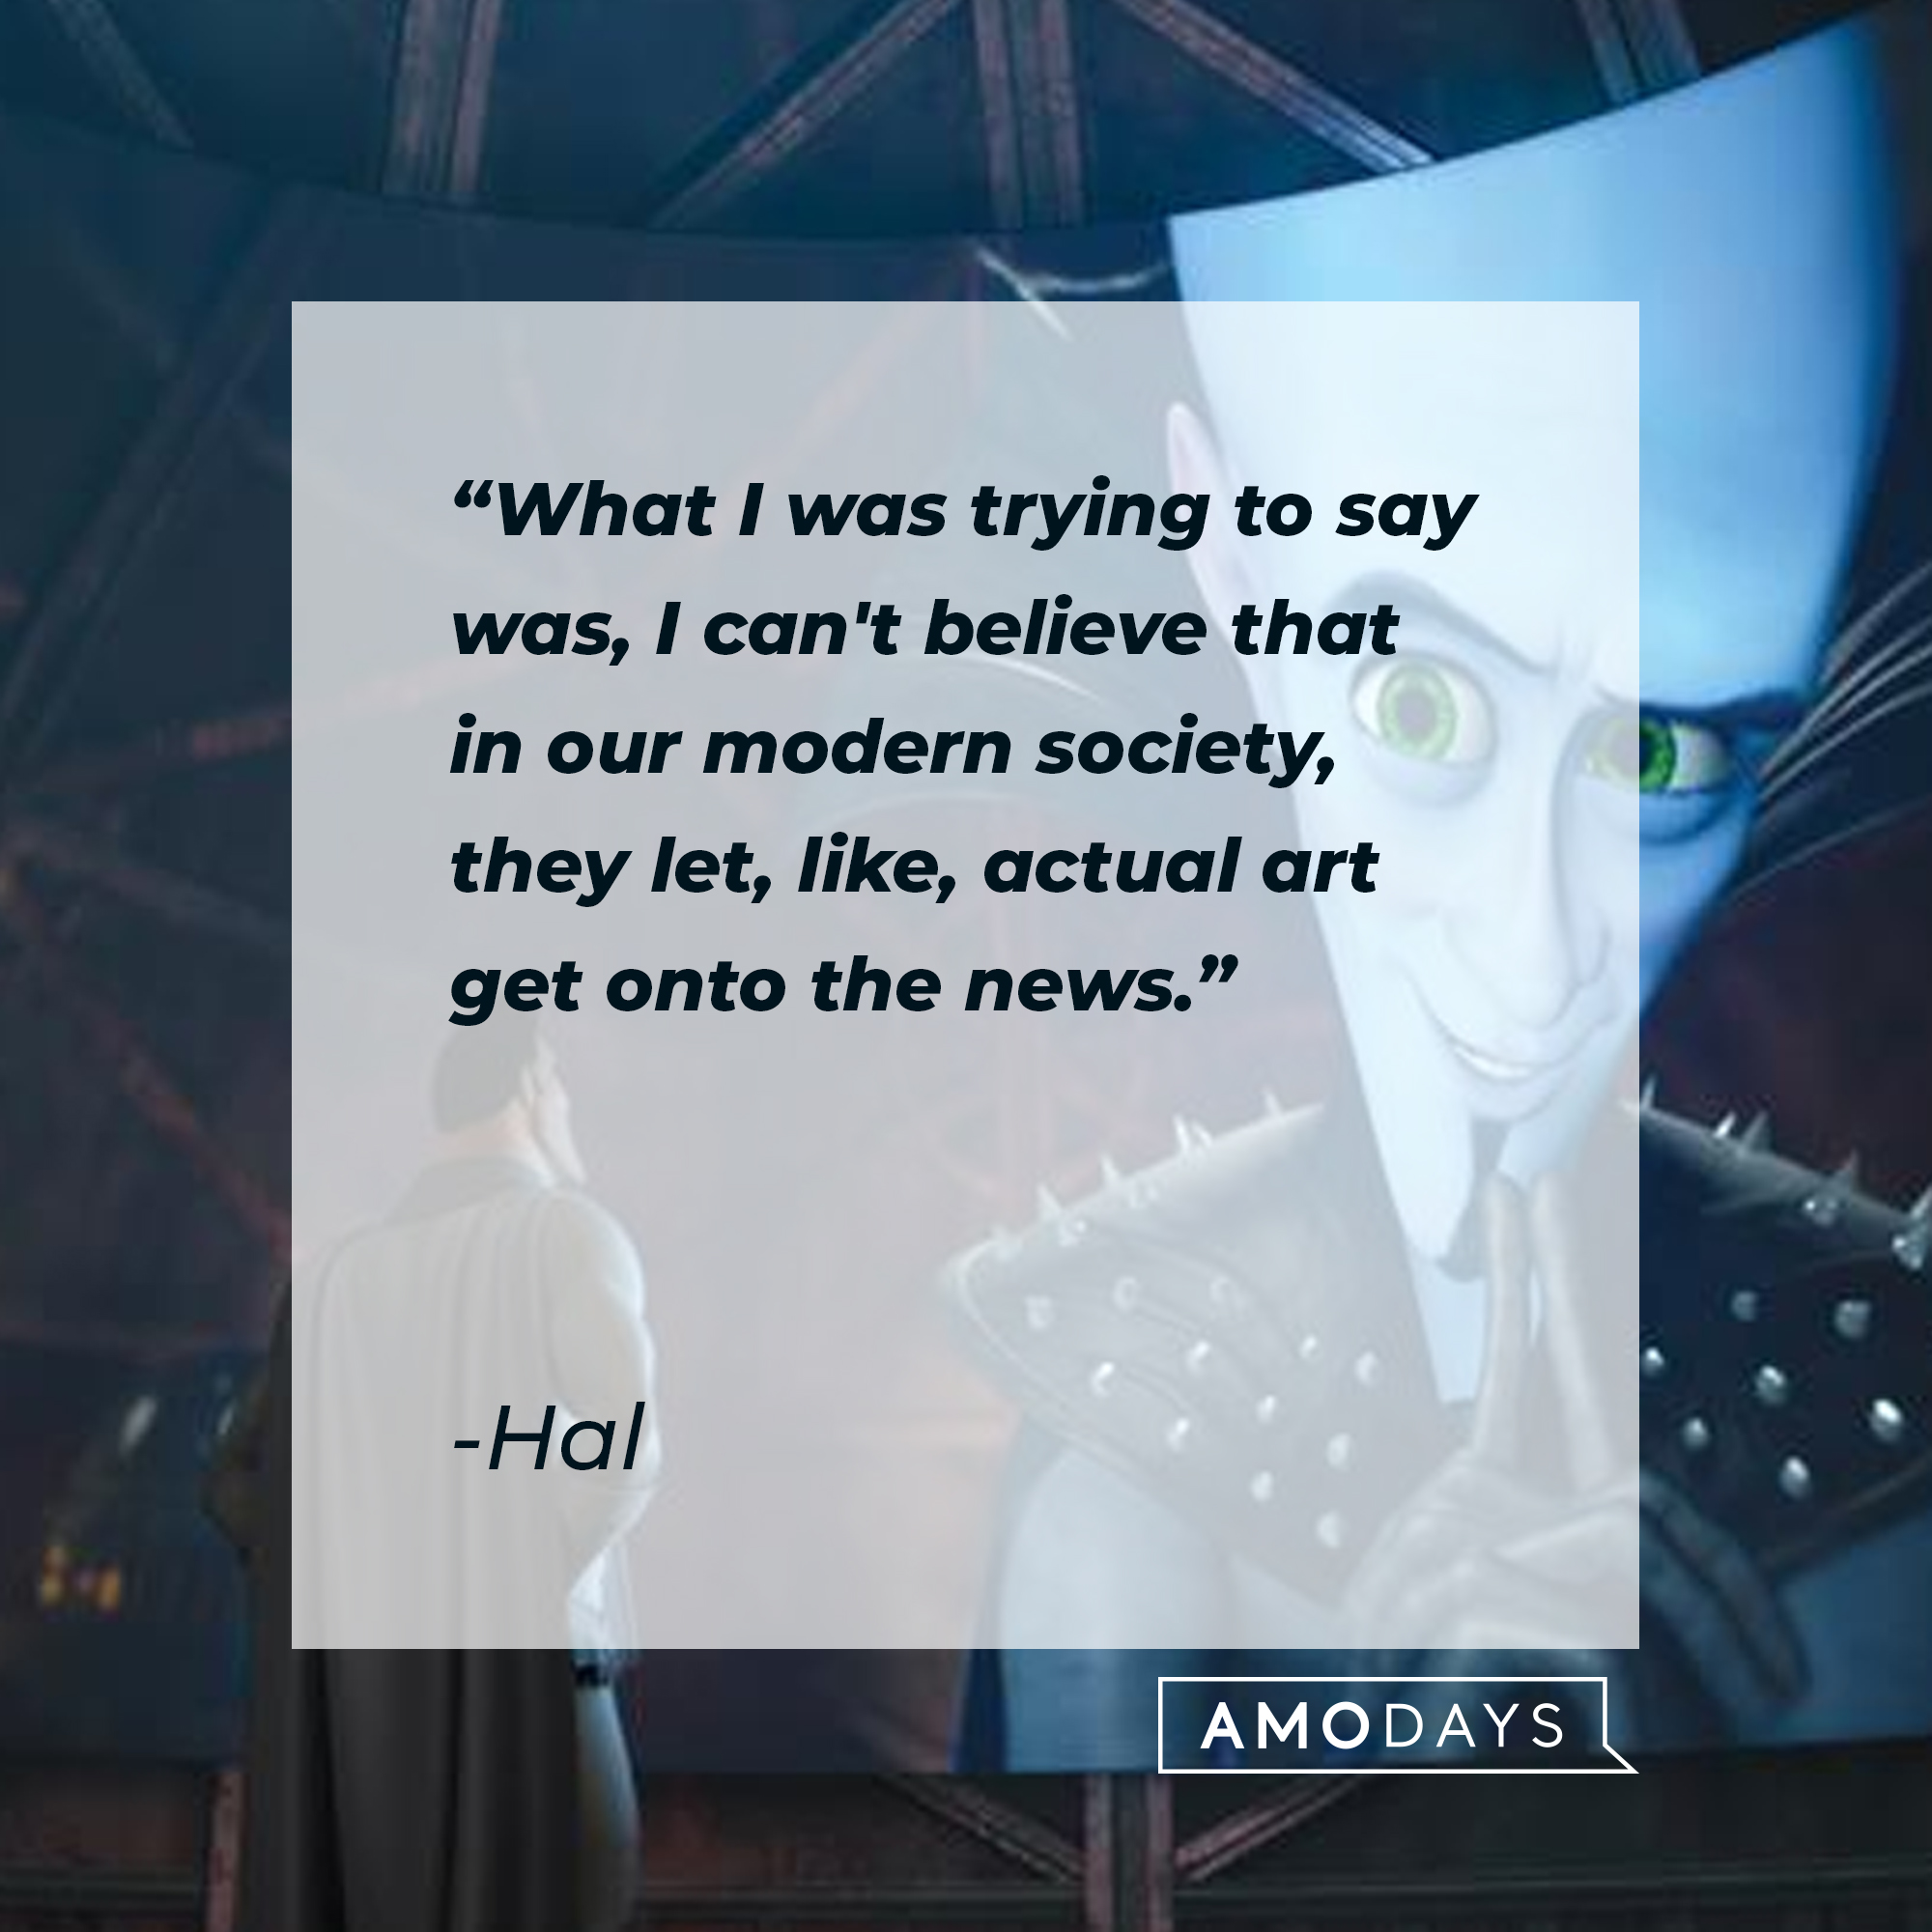 Hal's quote: "What I was trying to say was, I can't believe that in our modern society, they let, like, actual art get onto the news." | Source: Facebook.com/MegamindUK